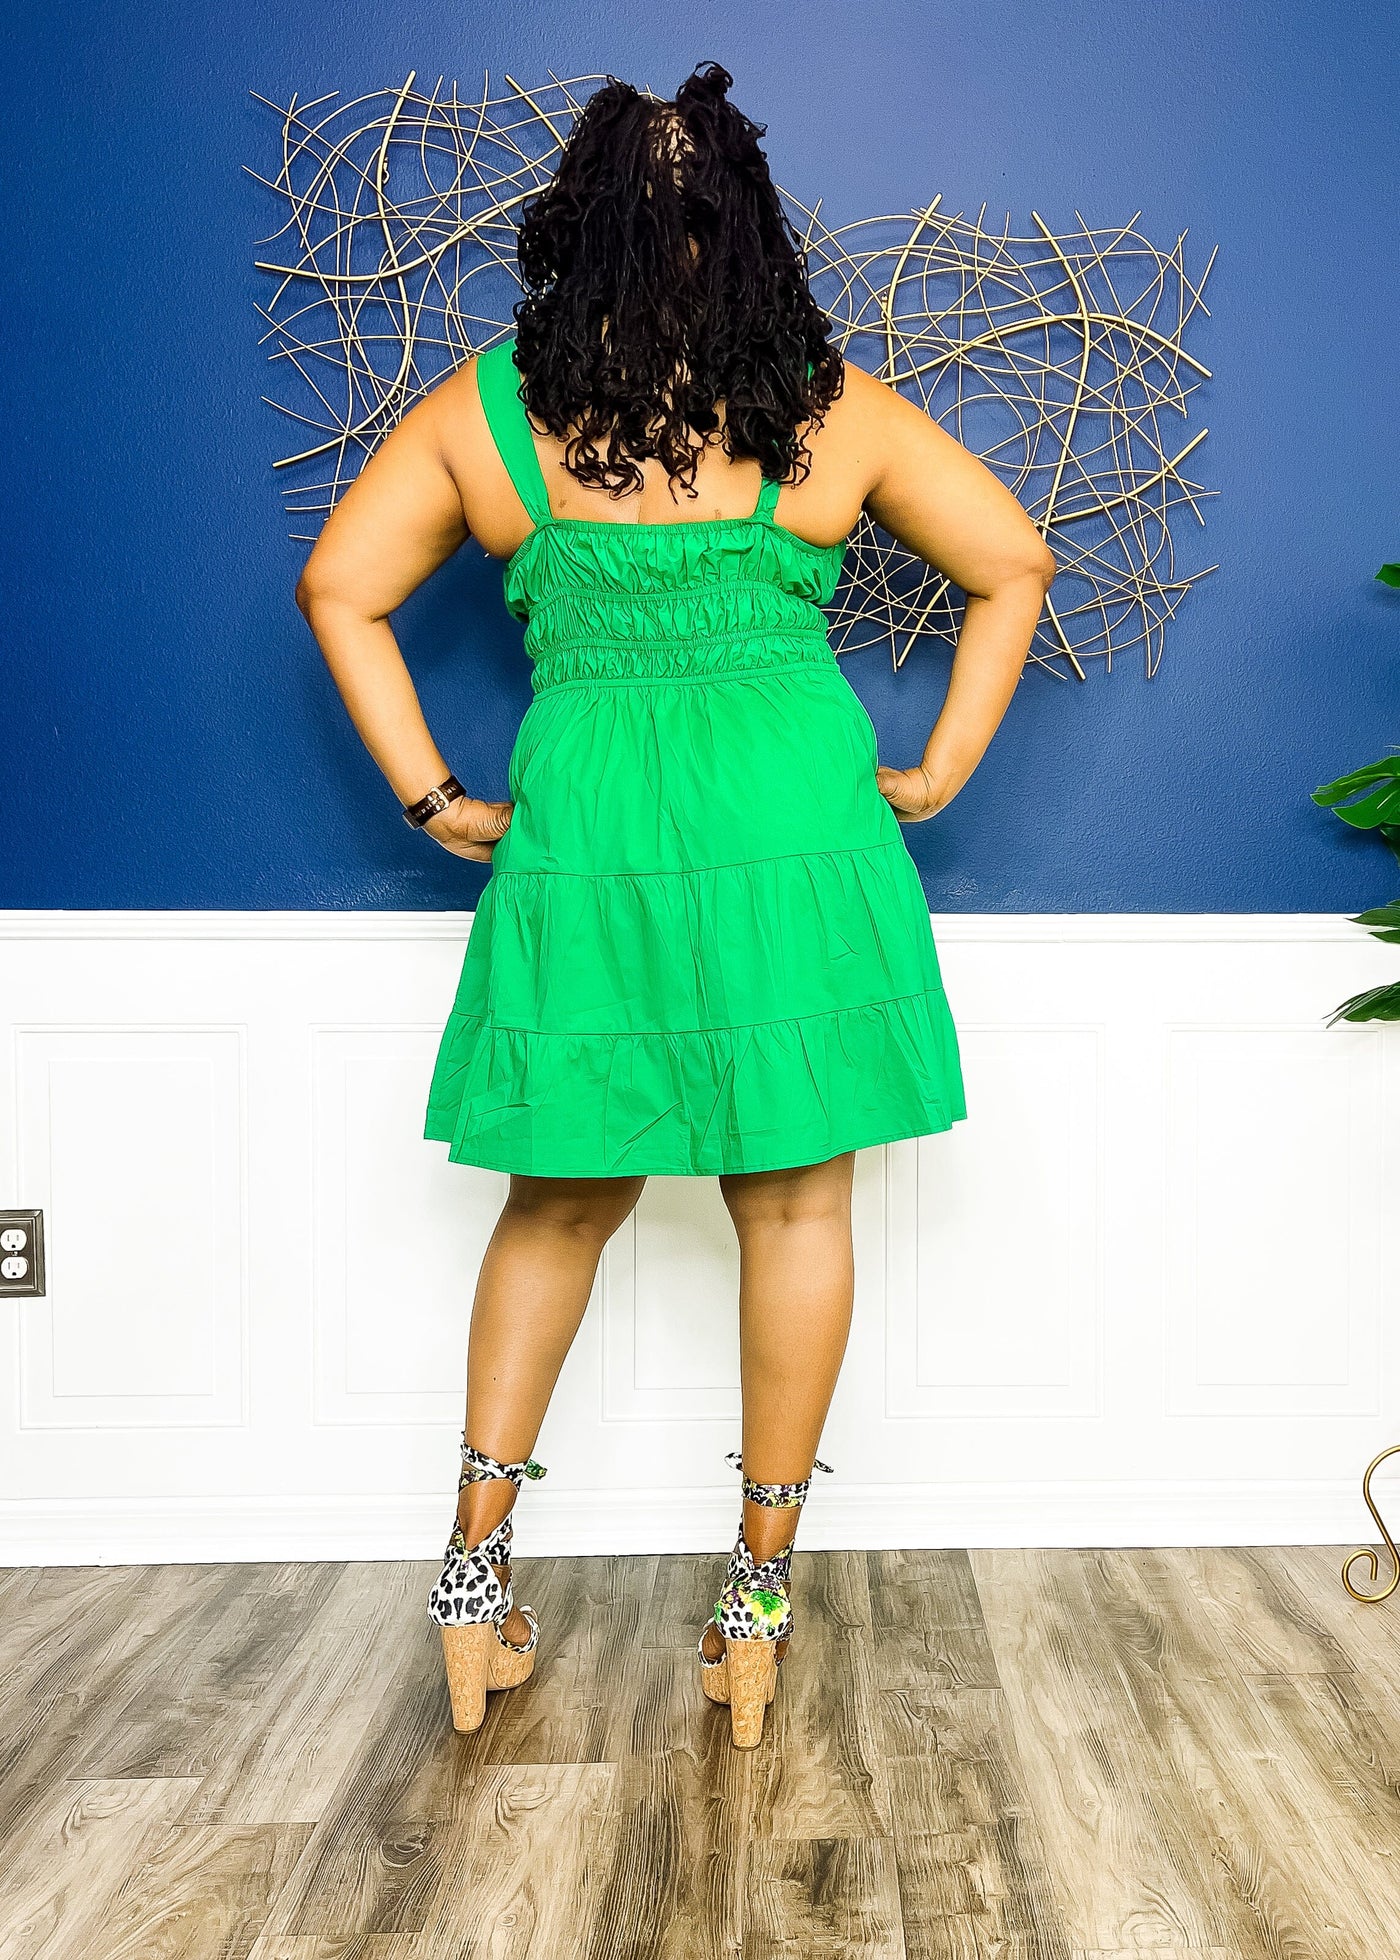 Just a Pop of Fun Dress- Green Outfit Sets 